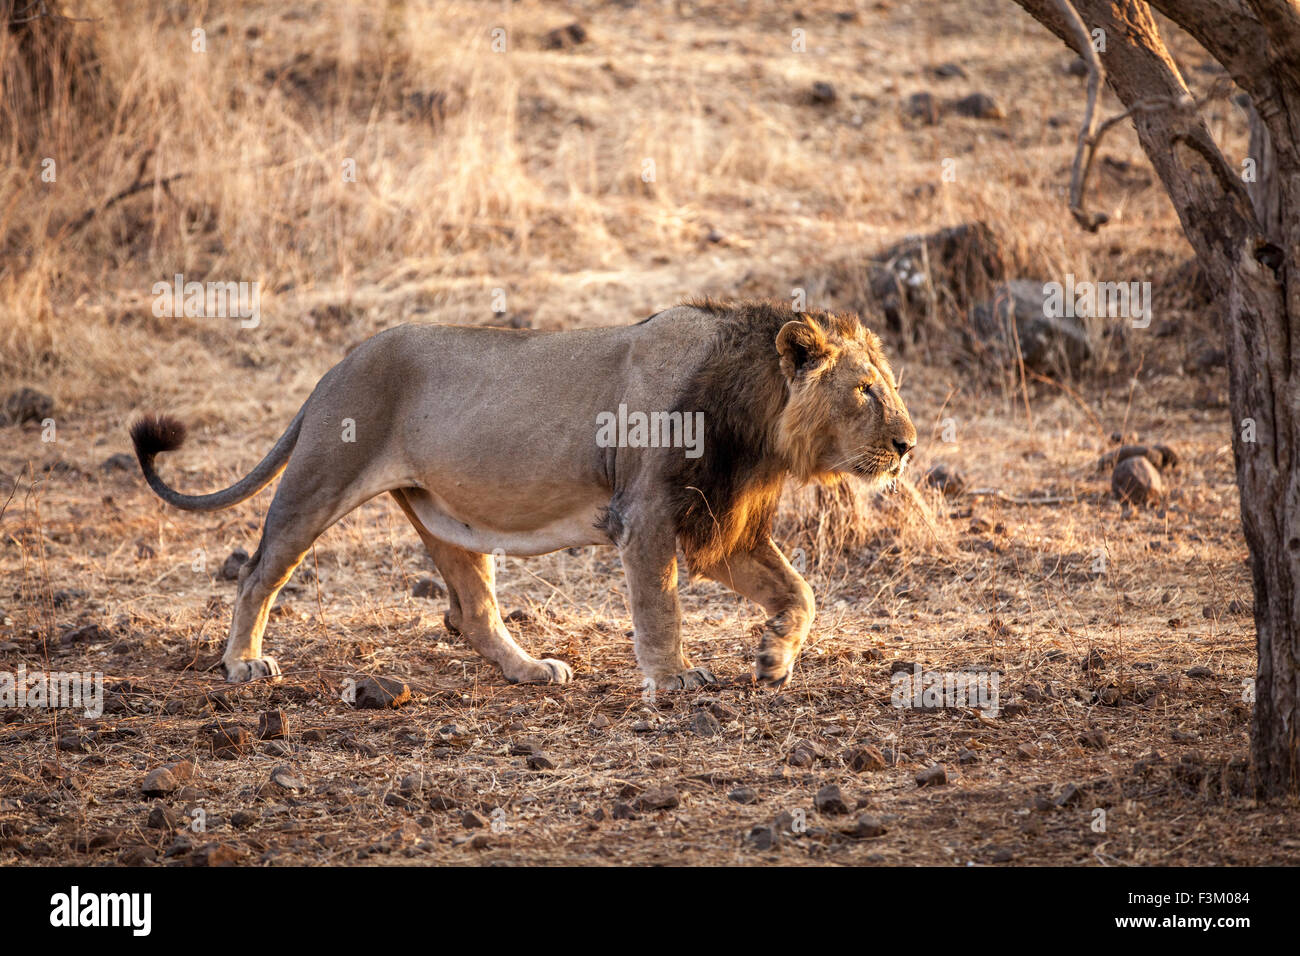 Asiatic Lion prowling (Panthera leo persica) at Gir forest, Gujarat, India. Stock Photo